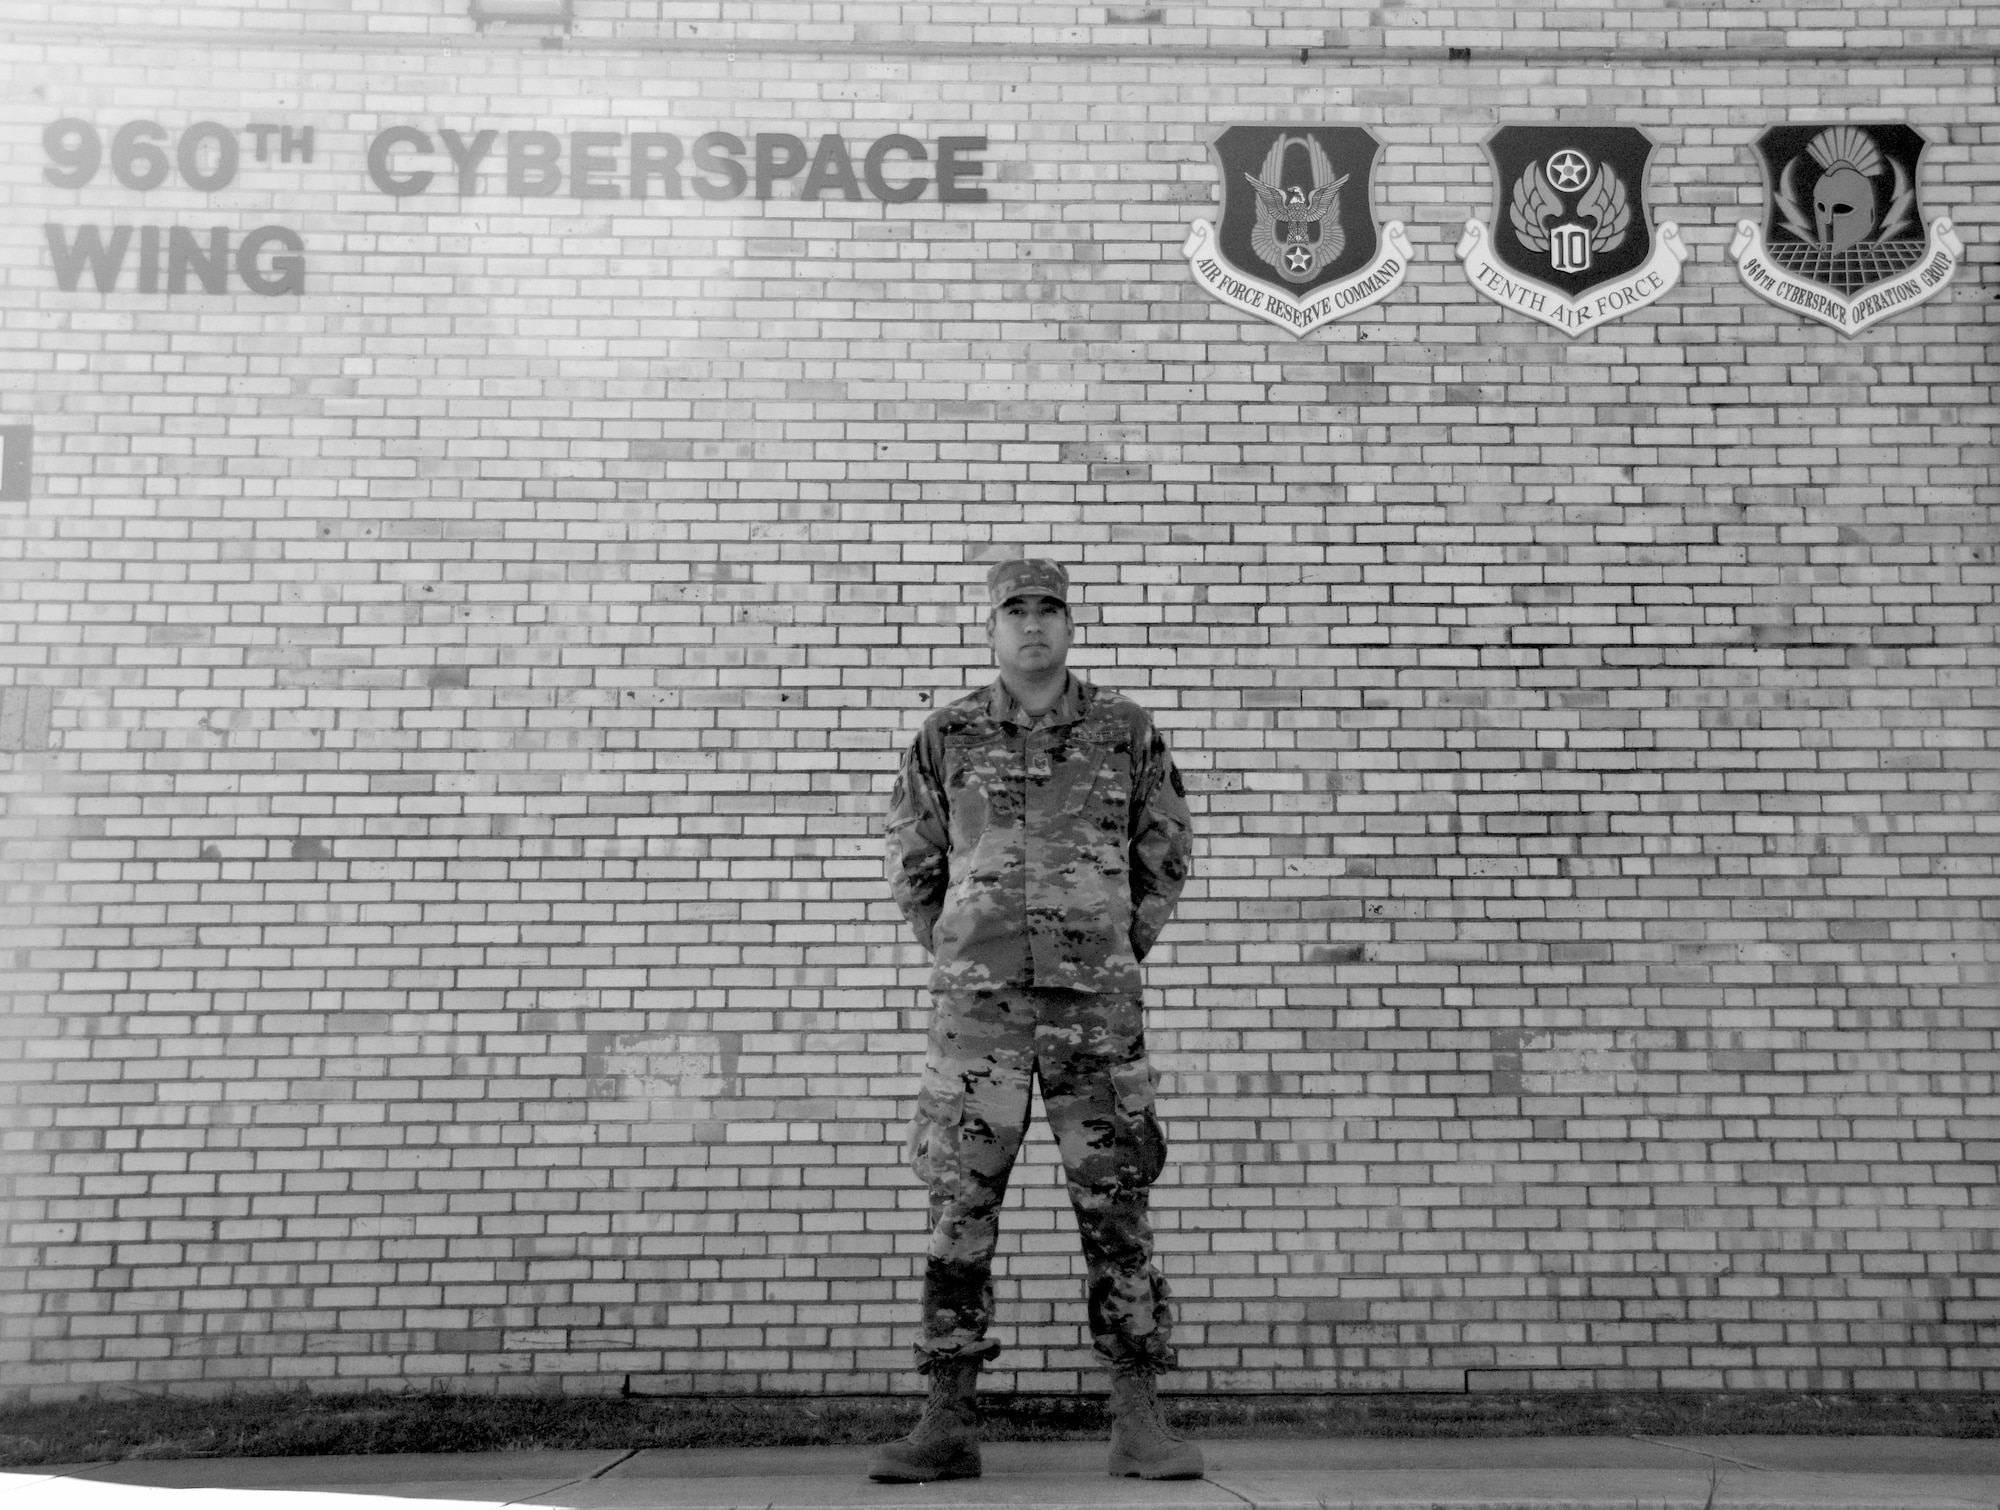 Tech. Sgt. Dominic CalvilloGonzales, 426th Network Warfare Squadron operations training specialist, stands for a photograph Oct. 28, 2020, at Joint Base San Antonio-Chapman Training Annex, Texas. (U.S. Air Force photo by Samantha Mathison)